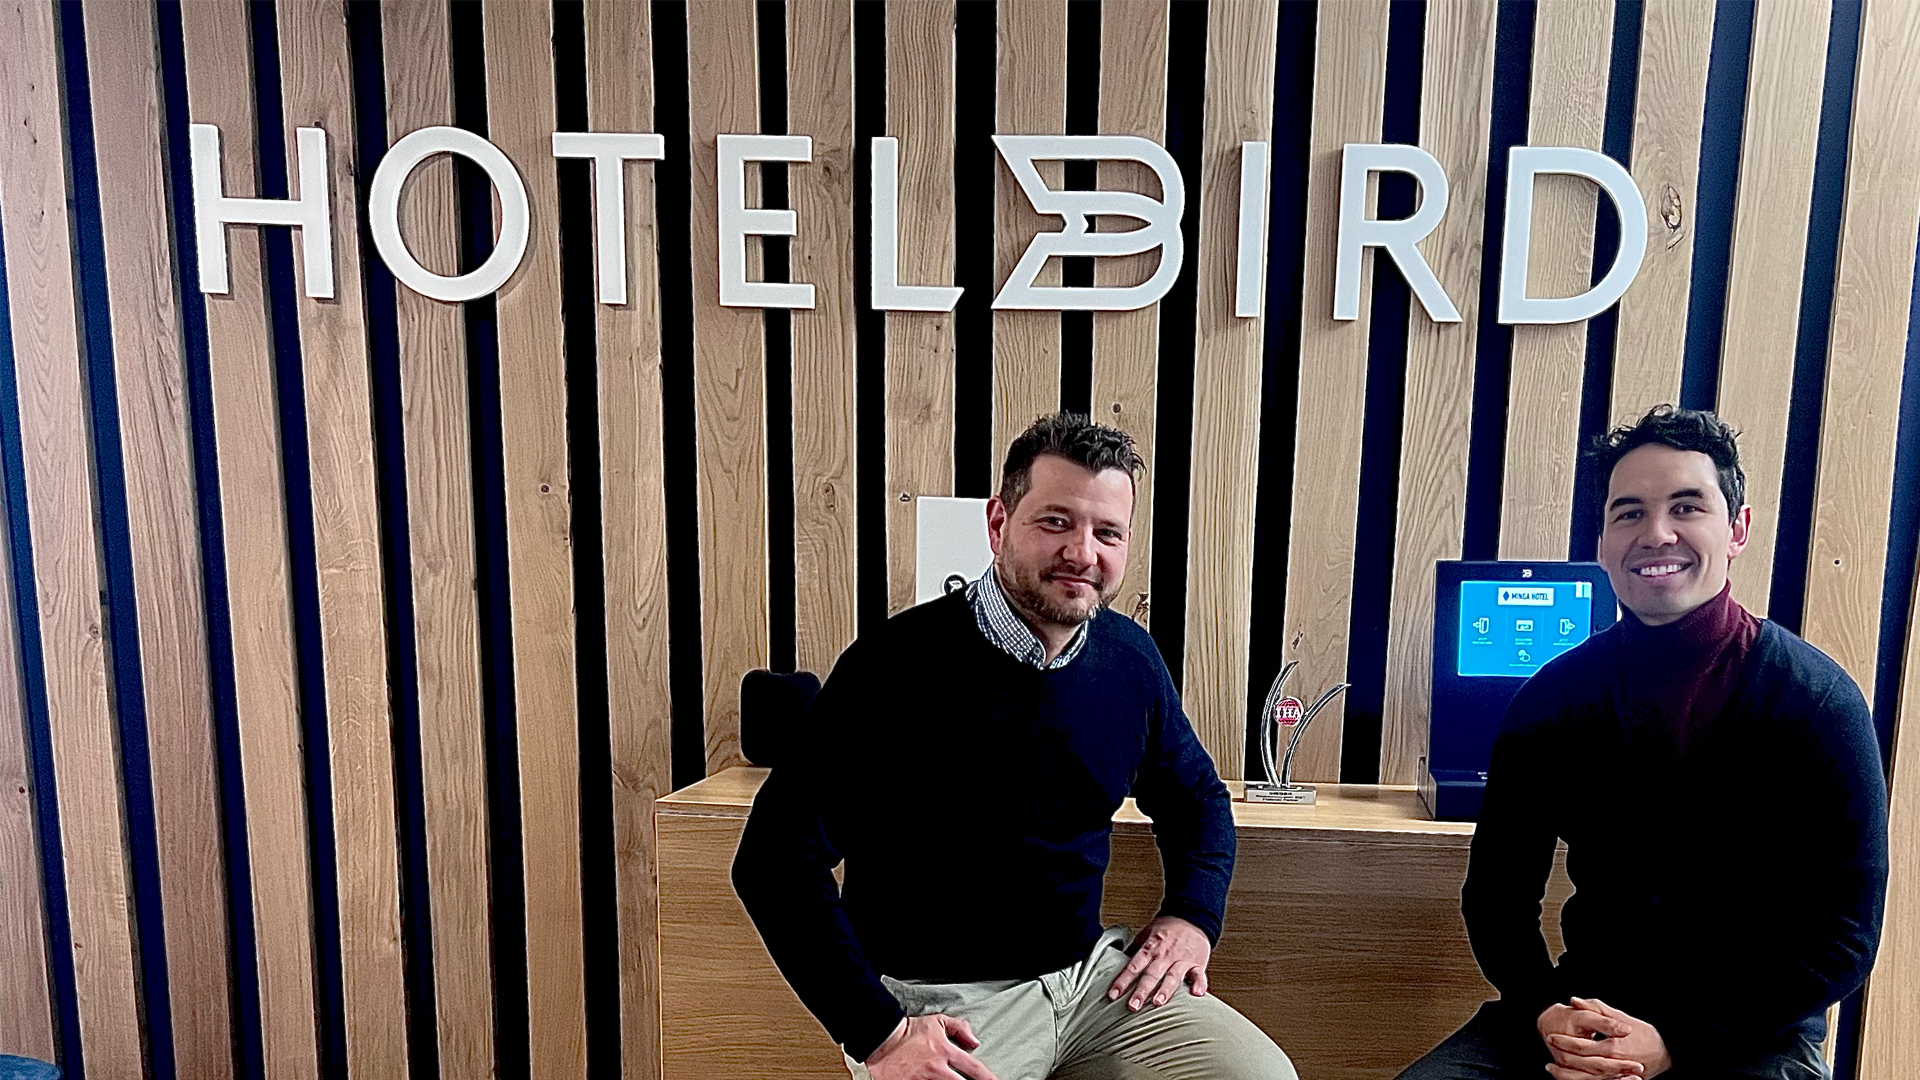 SIHOT and Hotelbird launch joint digital guest tech delivery